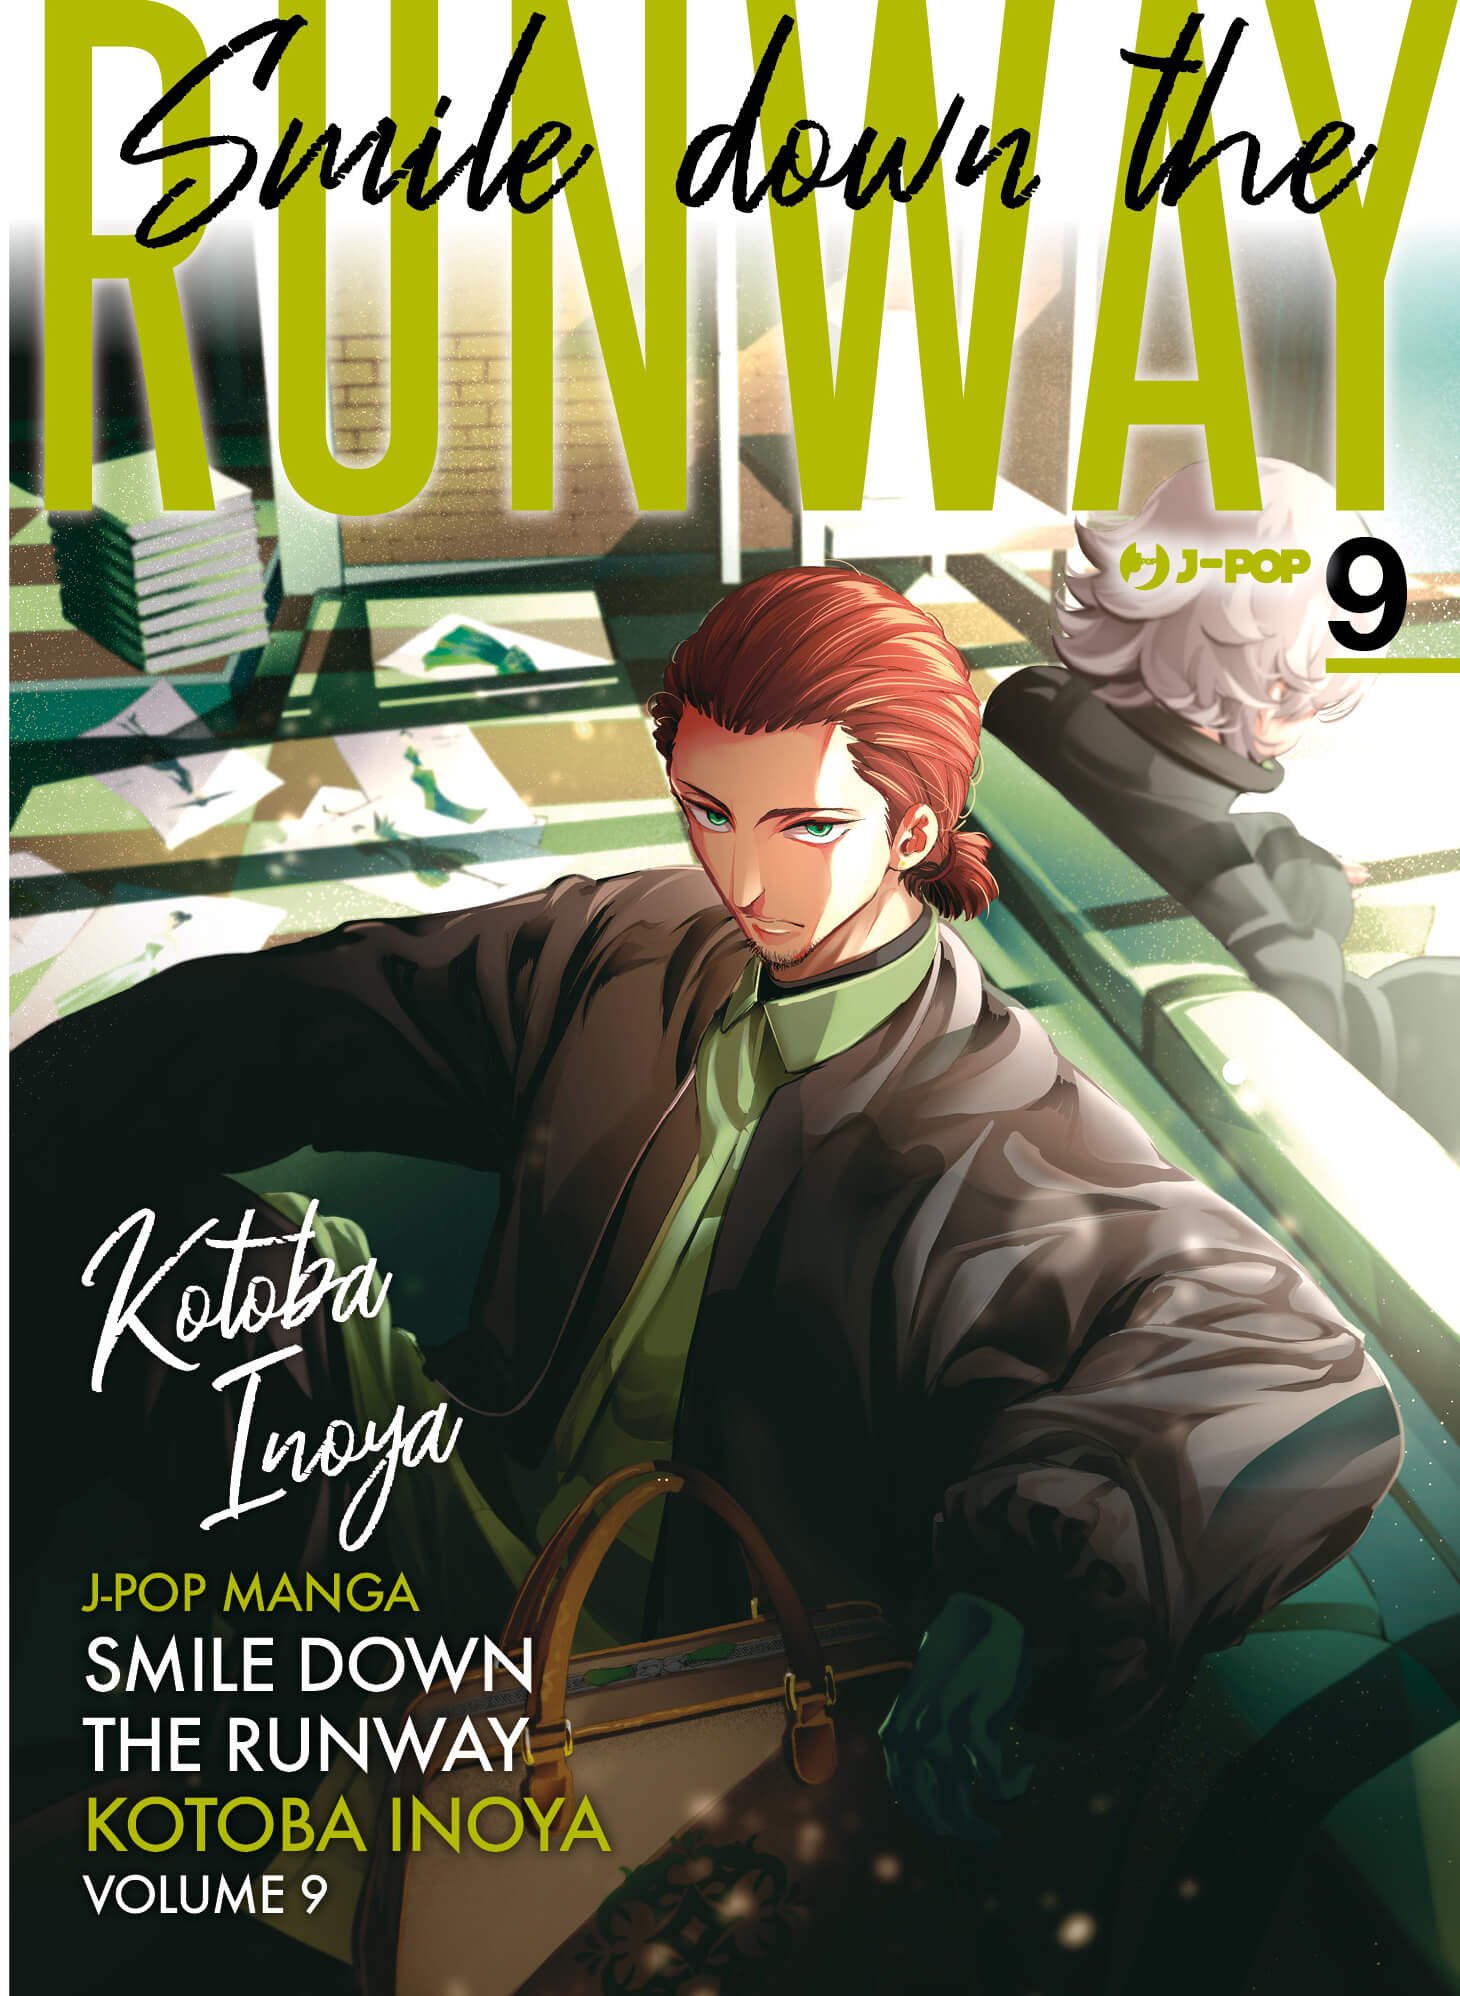 Smile down the Runway 9, tra le uscite J-POP Manga dell’11 gennaio 2023